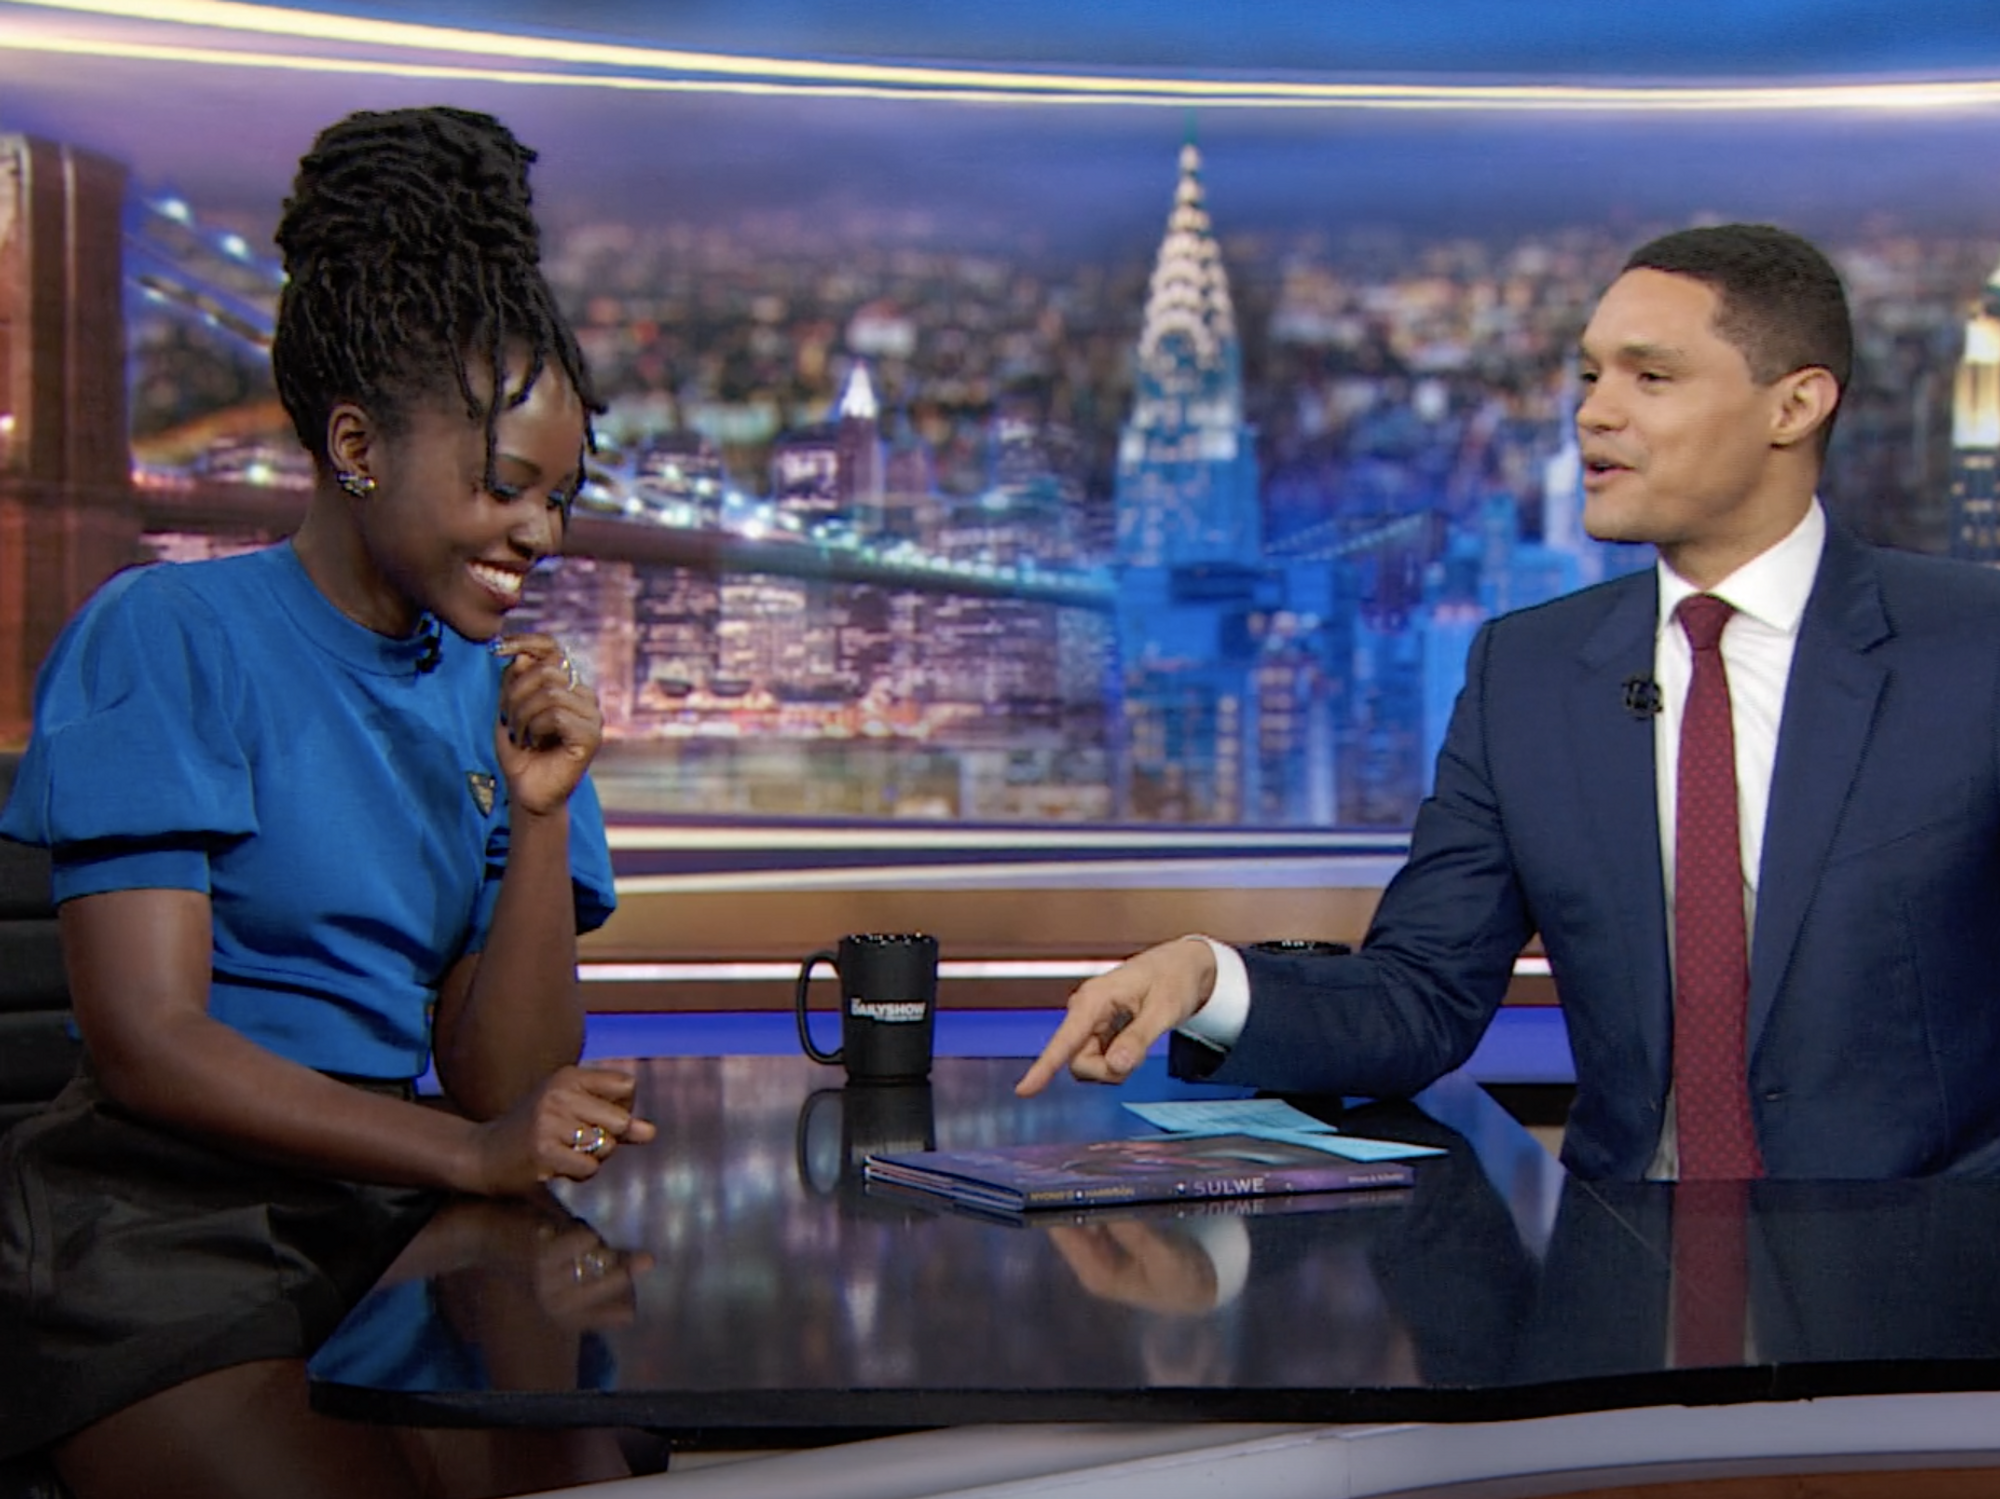 Watch Lupita Nyong'o's Interview on 'The Daily Show With Trevor Noah'